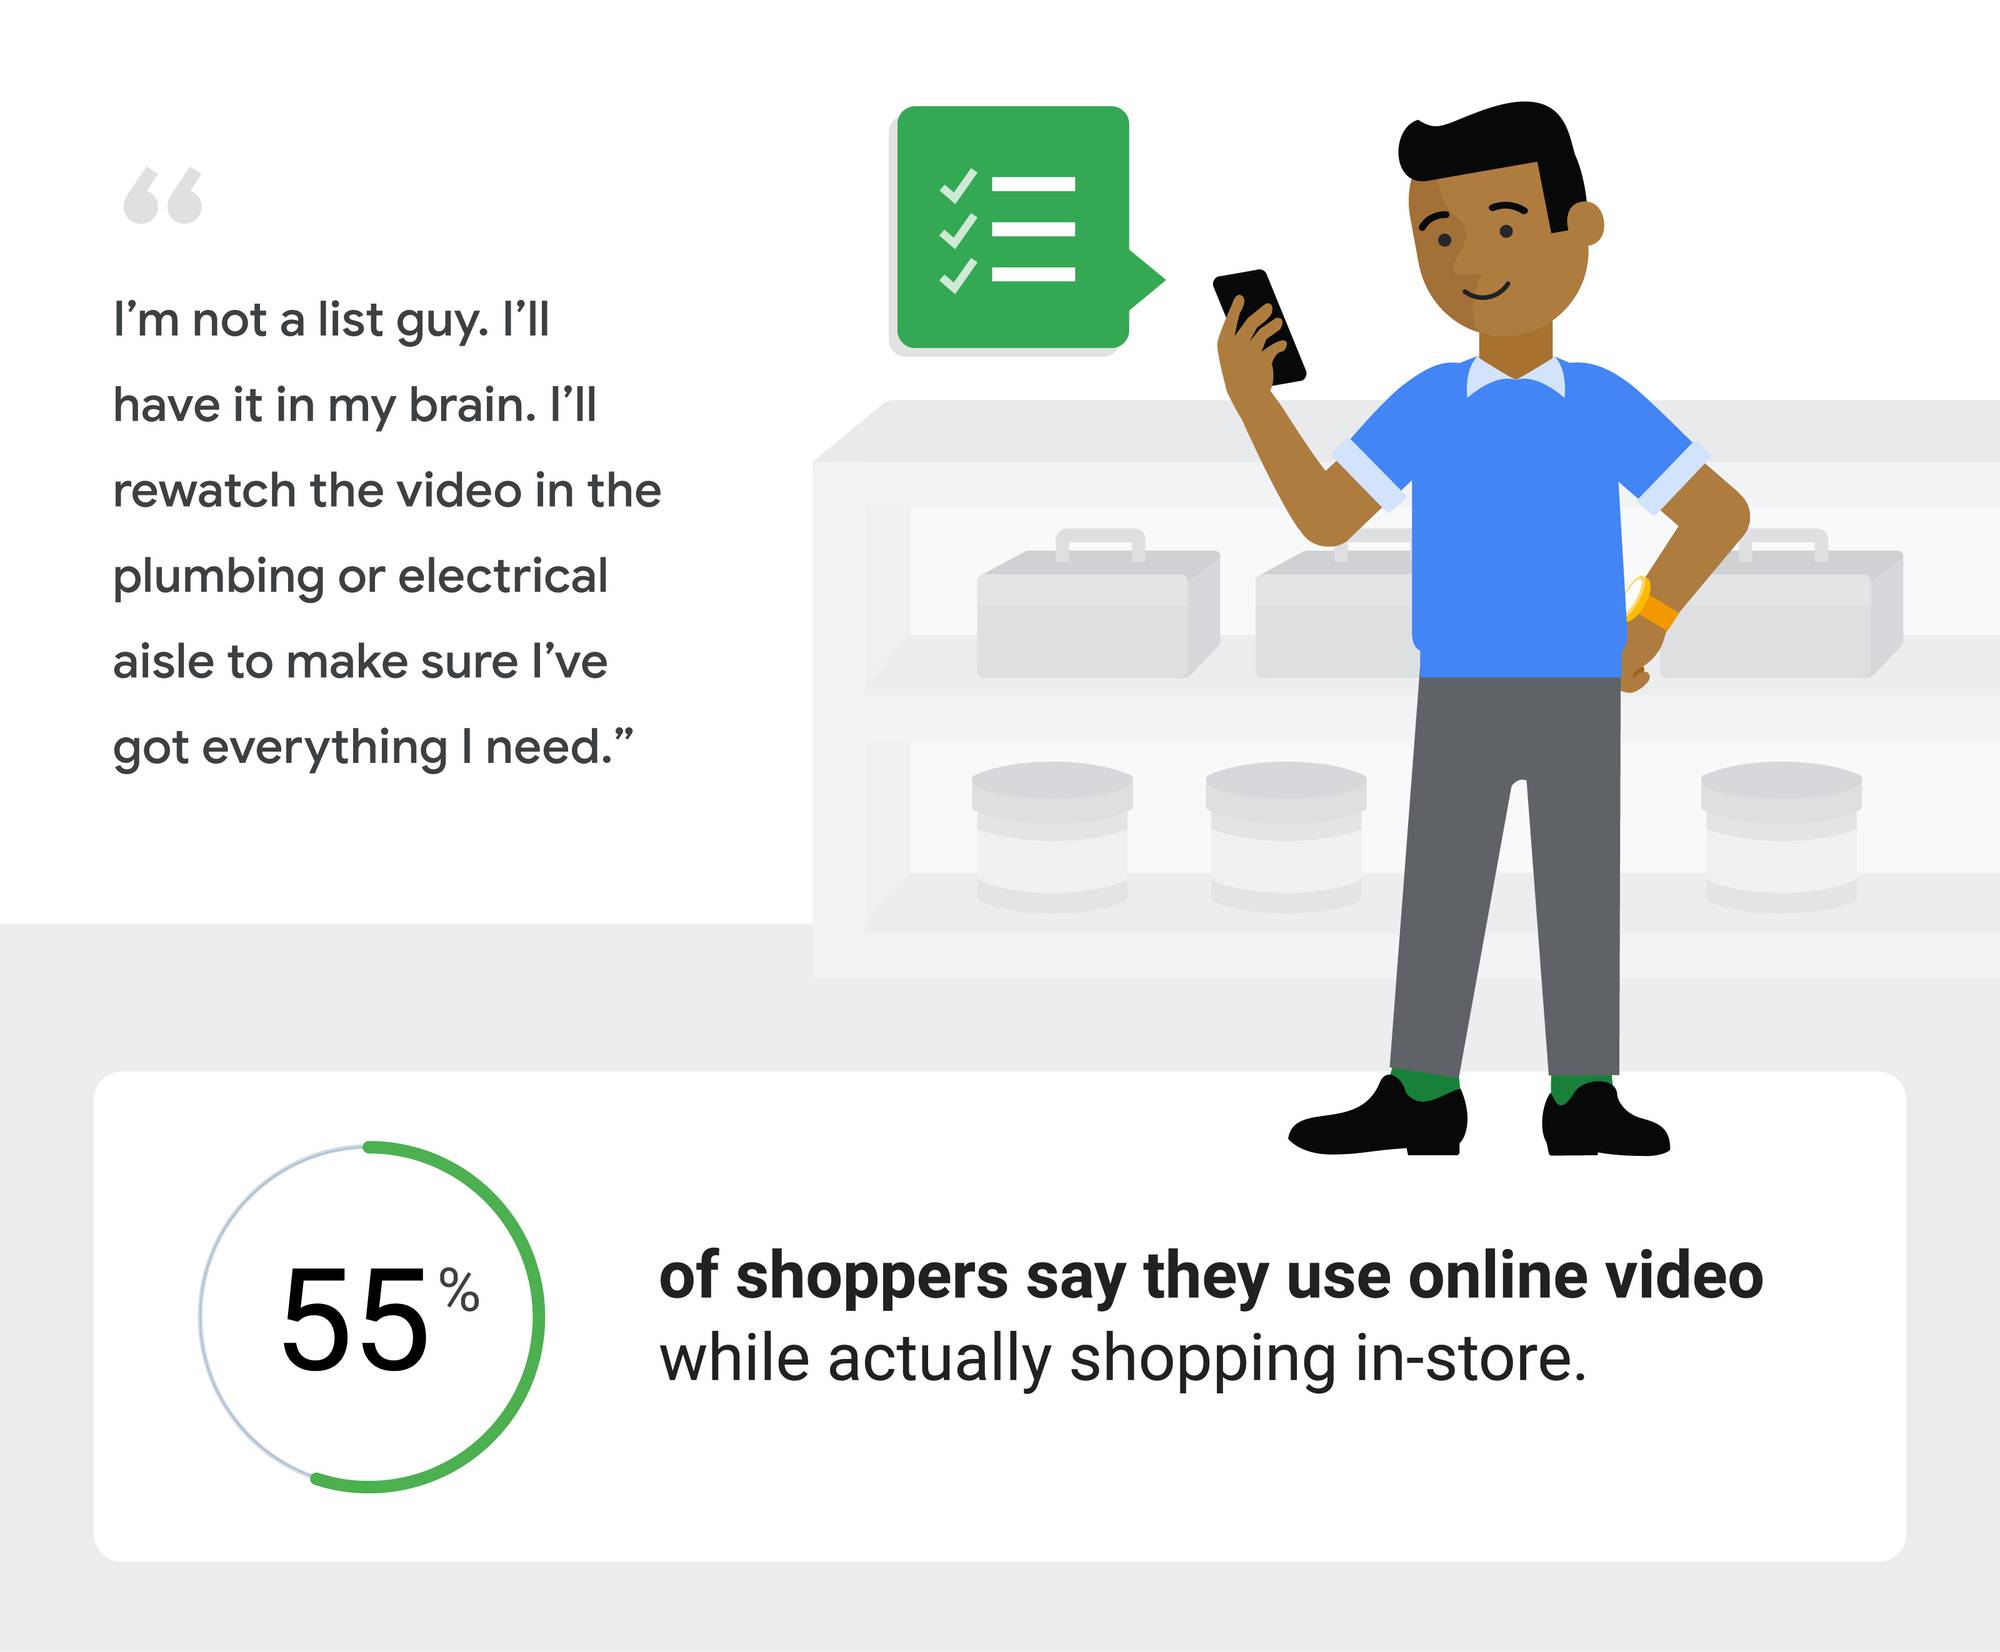 A man looks at a list on his phone. “I’m not a list guy. I have it in my brain. I’ll watch the video in the plumbing or electrical aisle to make sure I’ve got everything I need.” 55% of shoppers say they use online video while actually shopping in-store.